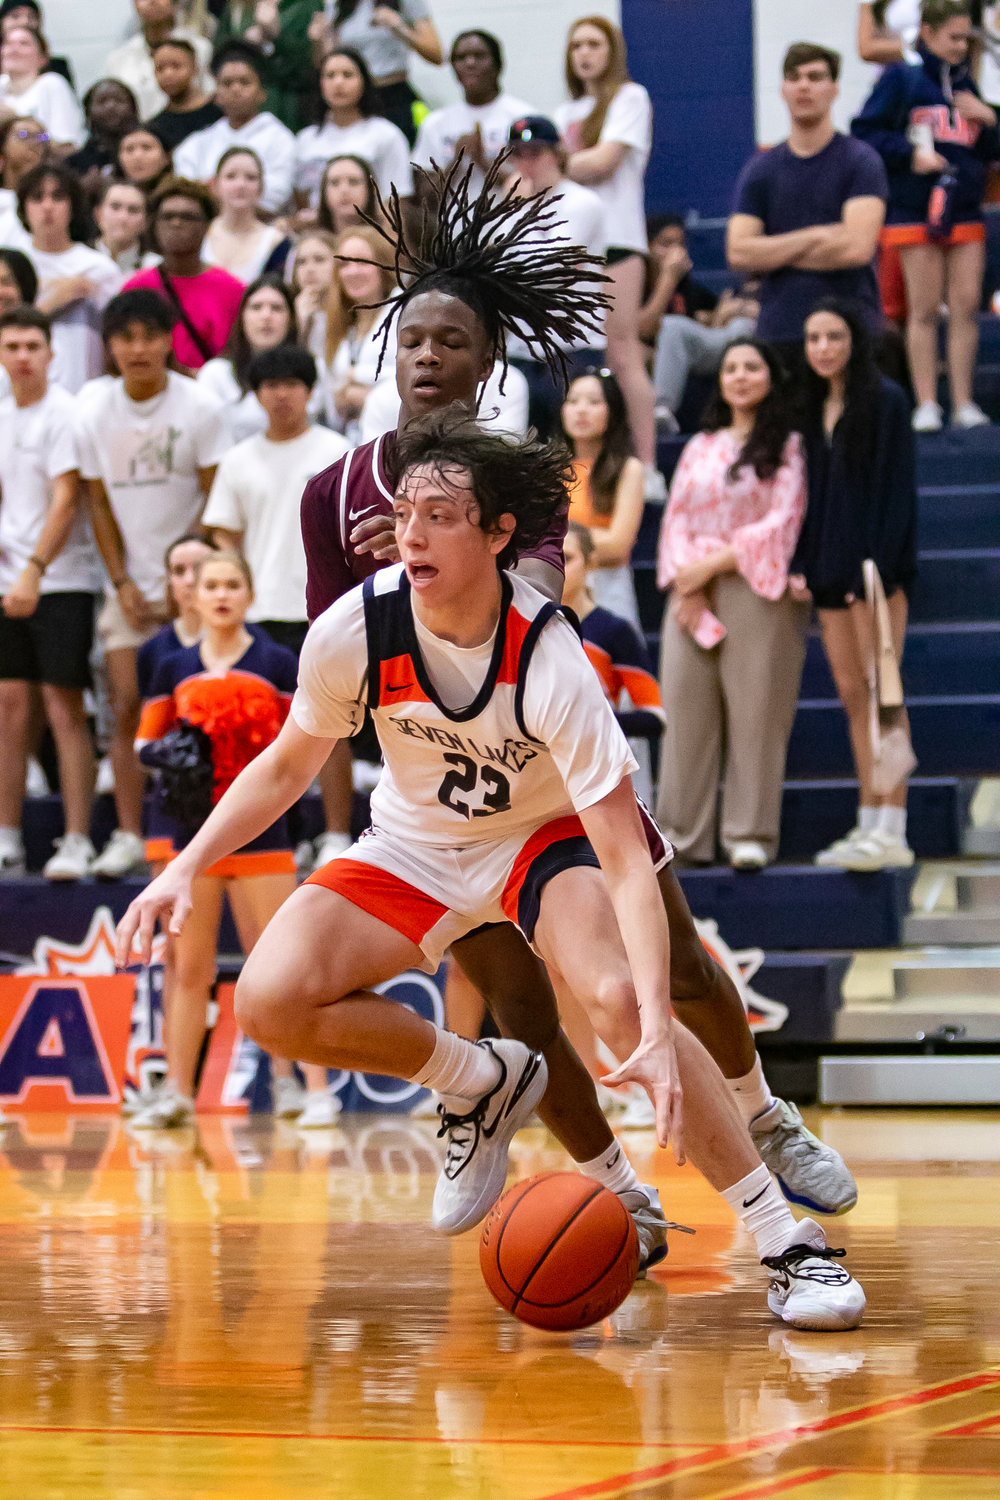 Brett Norton drives towards the basket during Saturday's game between Seven Lakes and Cinco Ranch at the Seven Lakes gym.